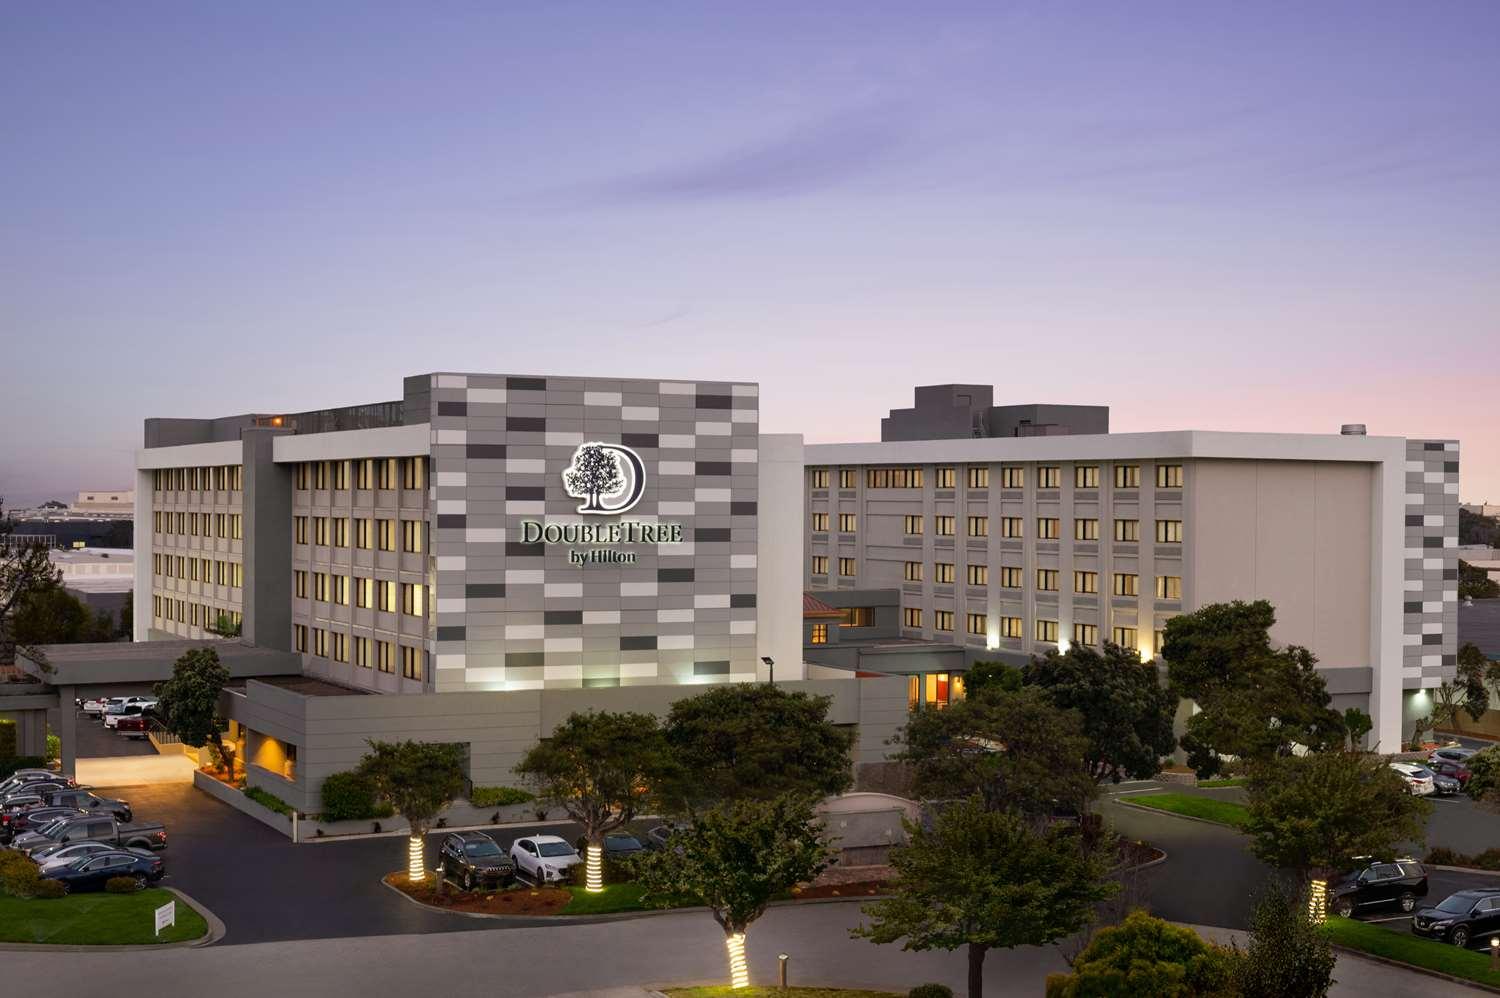 DoubleTree by Hilton San Francisco South Airport Blvd in South San Francisco, CA